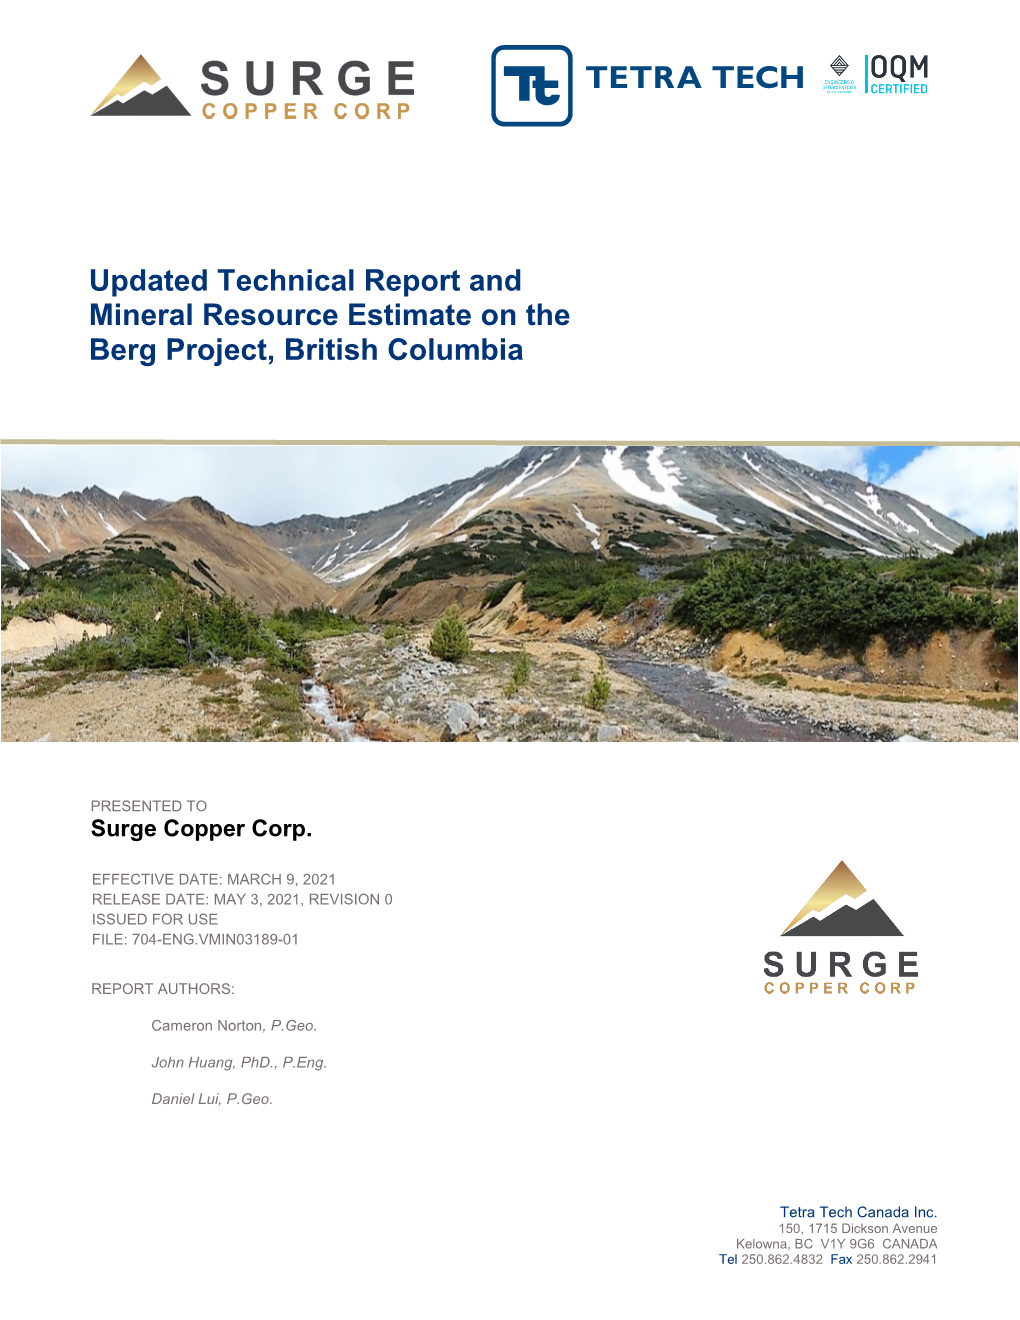 Updated Technical Report and Mineral Resource Estimate on the Berg Project, British Columbia